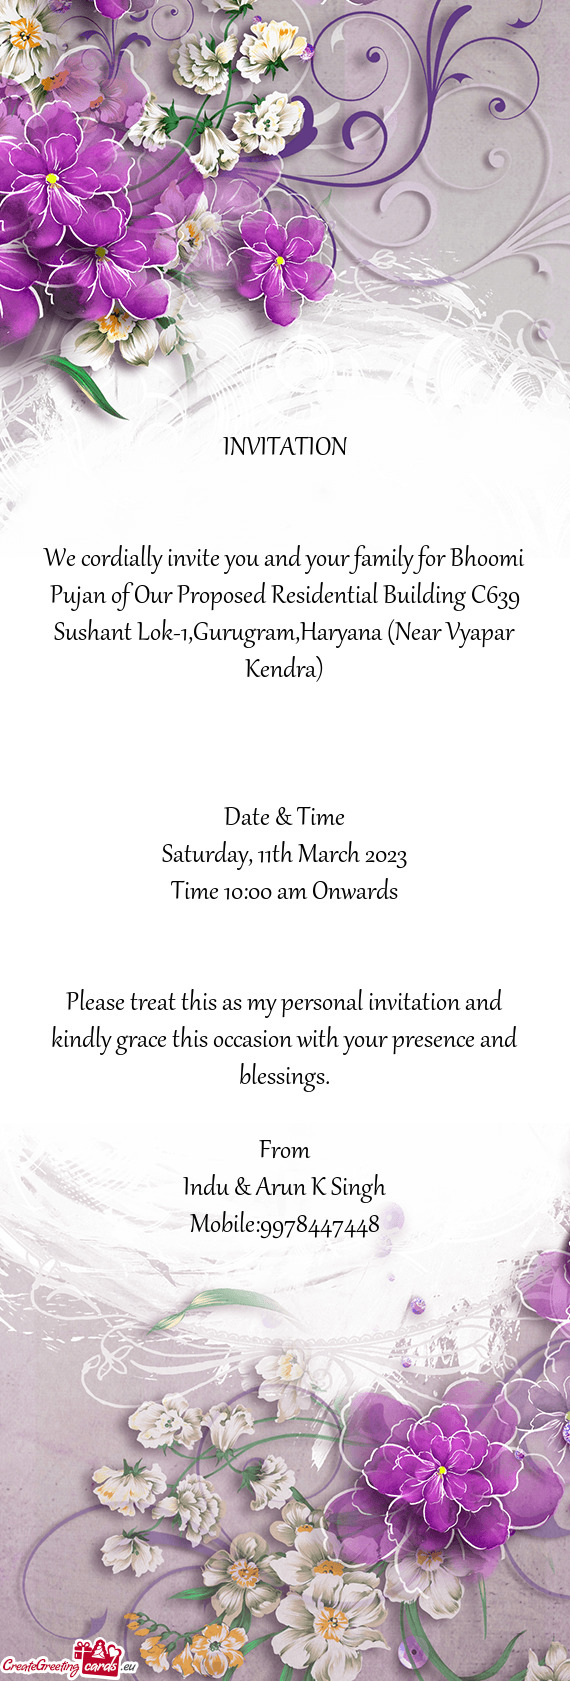 We cordially invite you and your family for Bhoomi Pujan of Our Proposed Residential Building C639 S